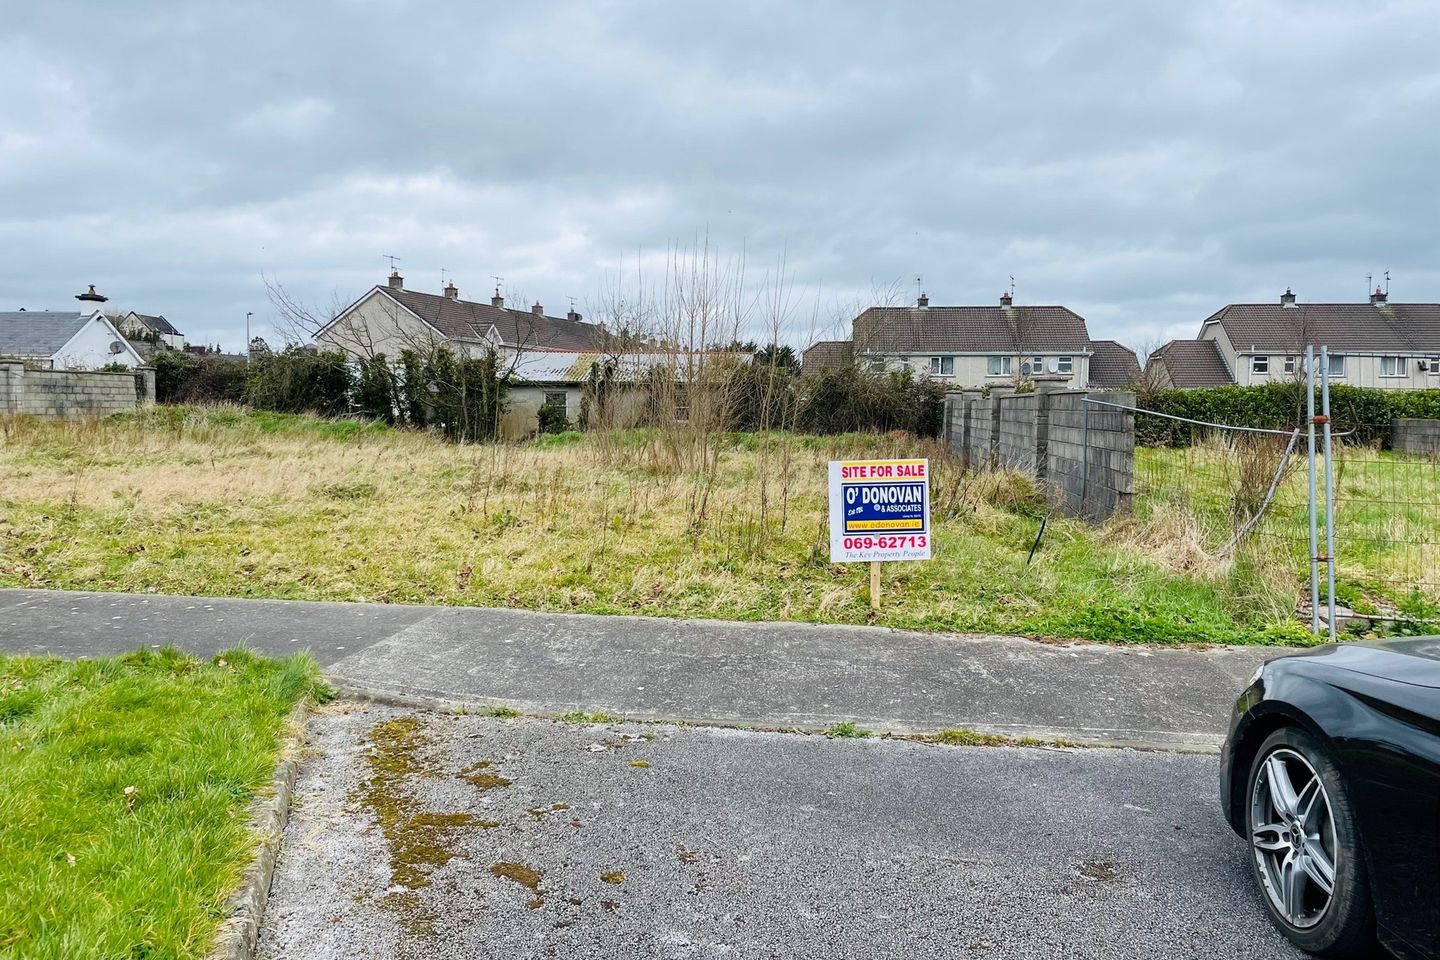 75 Meadow Court, Newcastle West, Co. Limerick, V42DT97